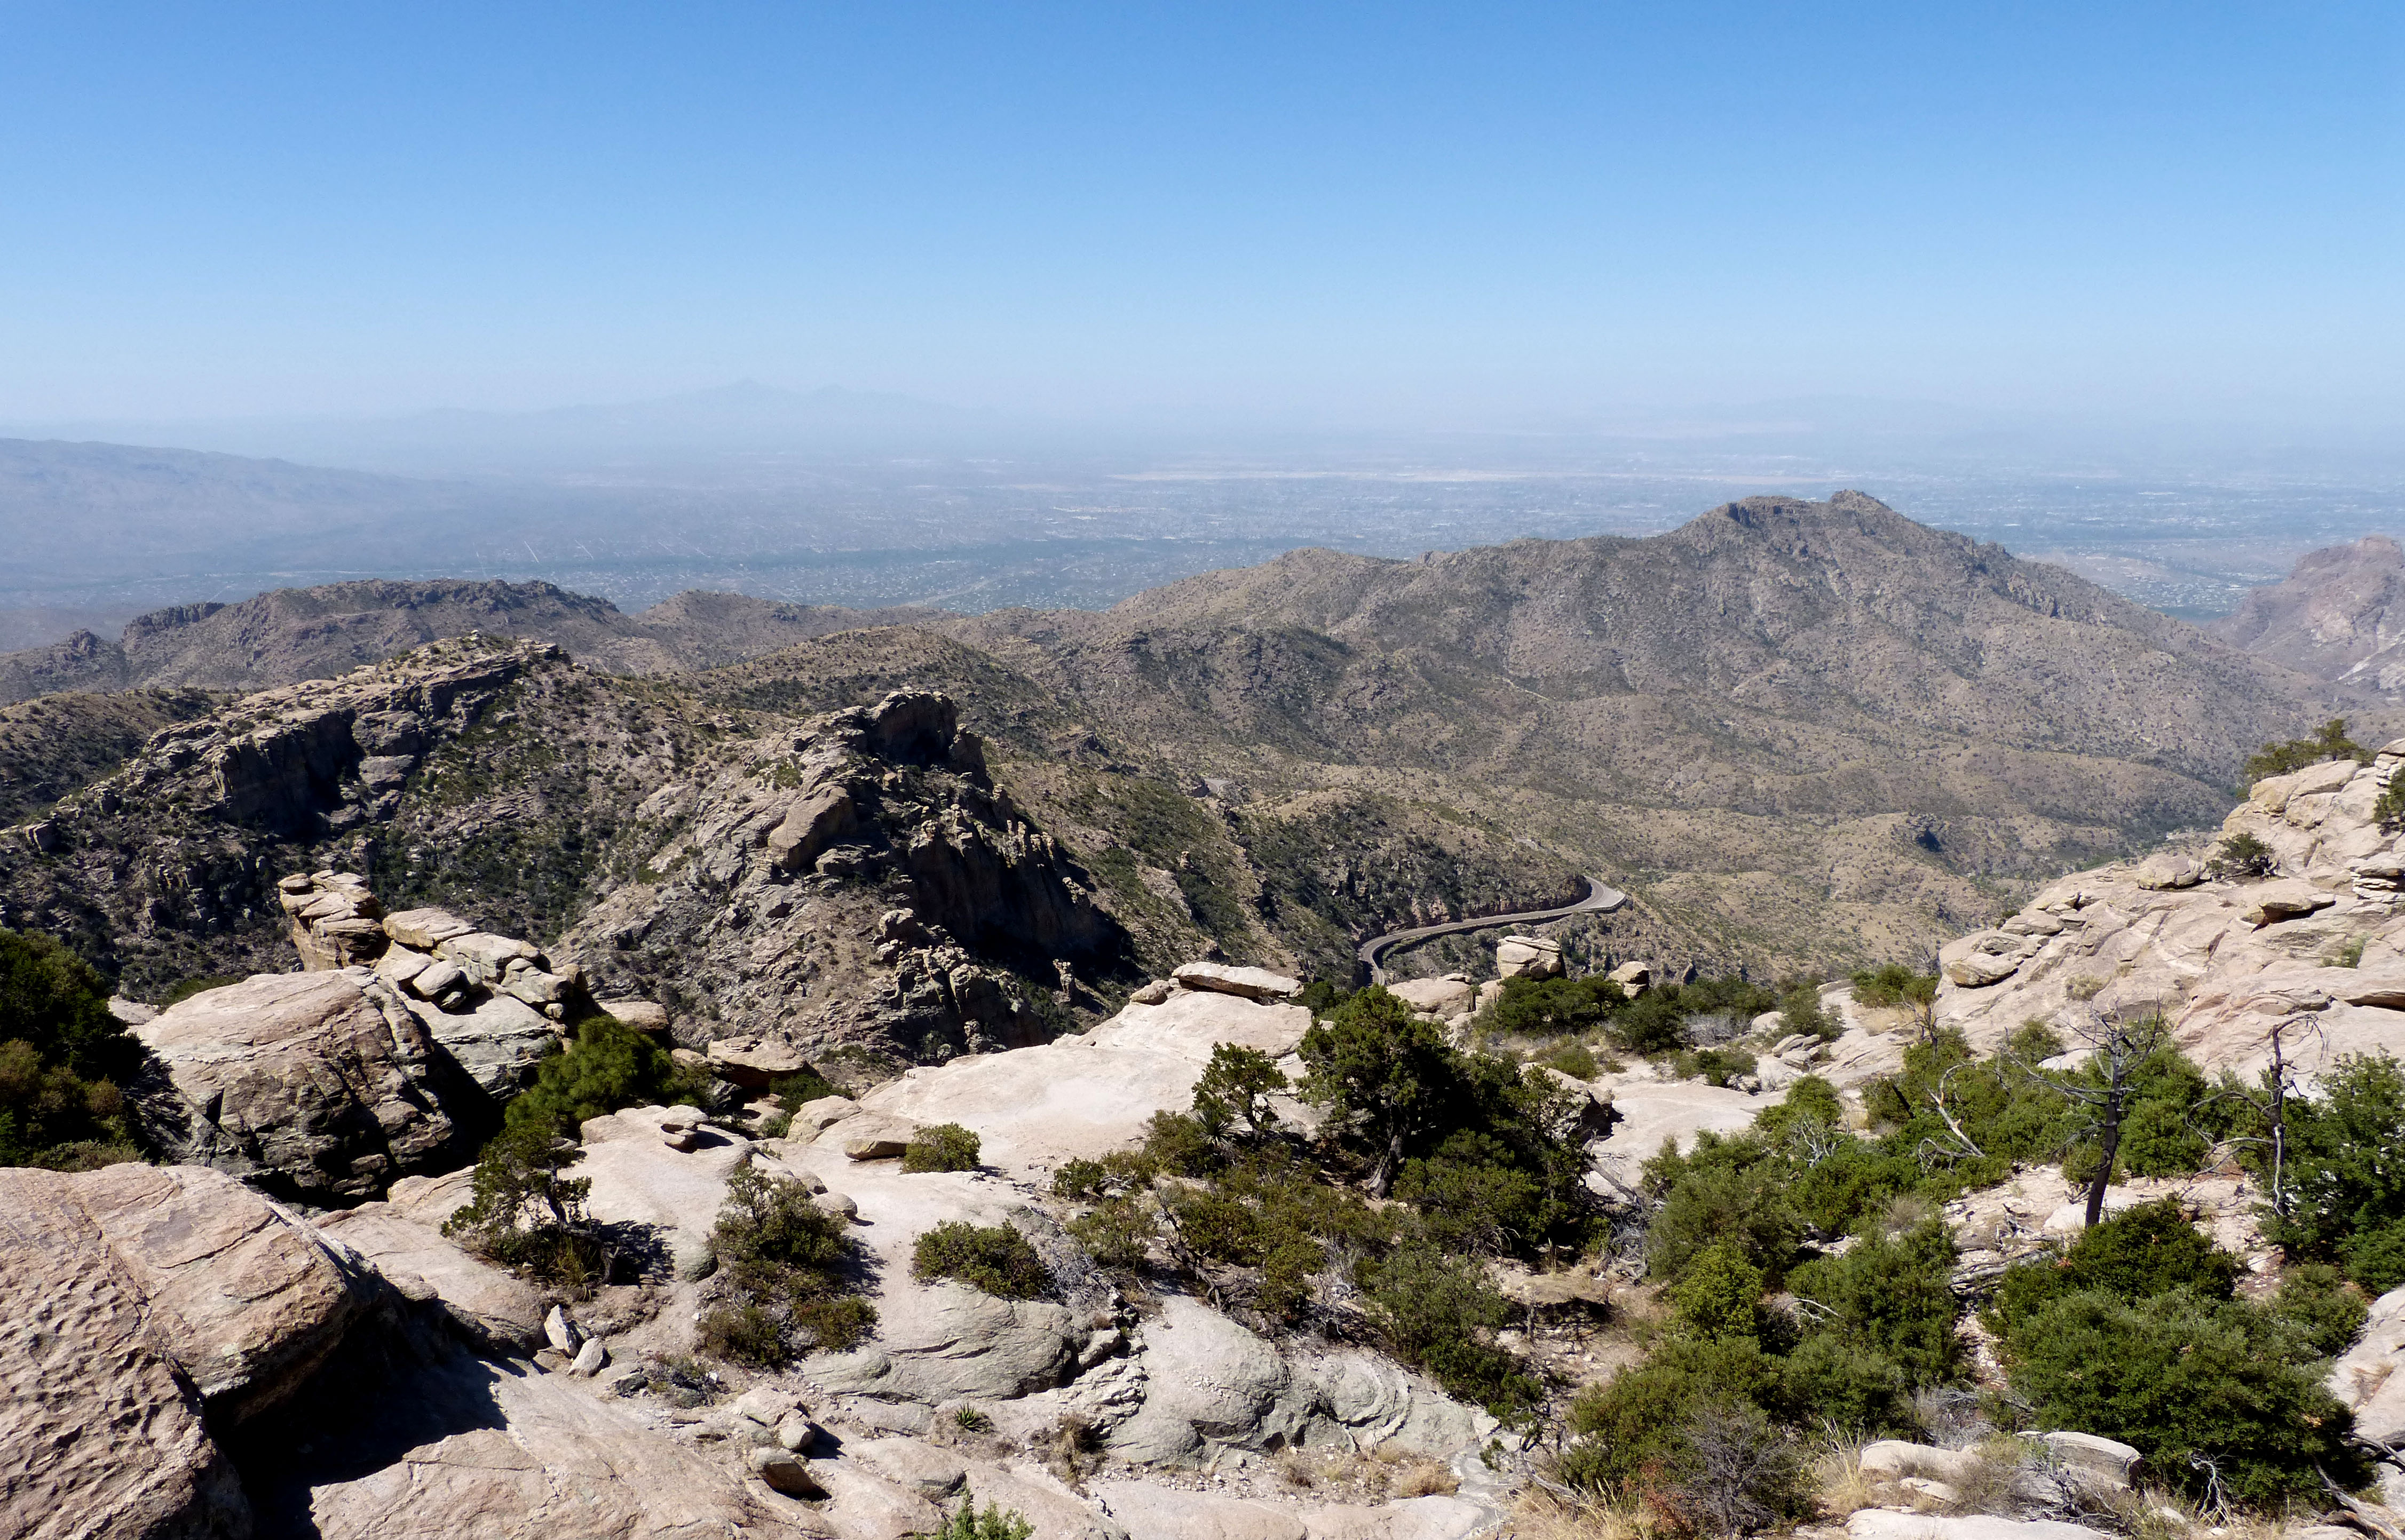 View from Mount Lemmon - Flickr - gailhampshire.jpg